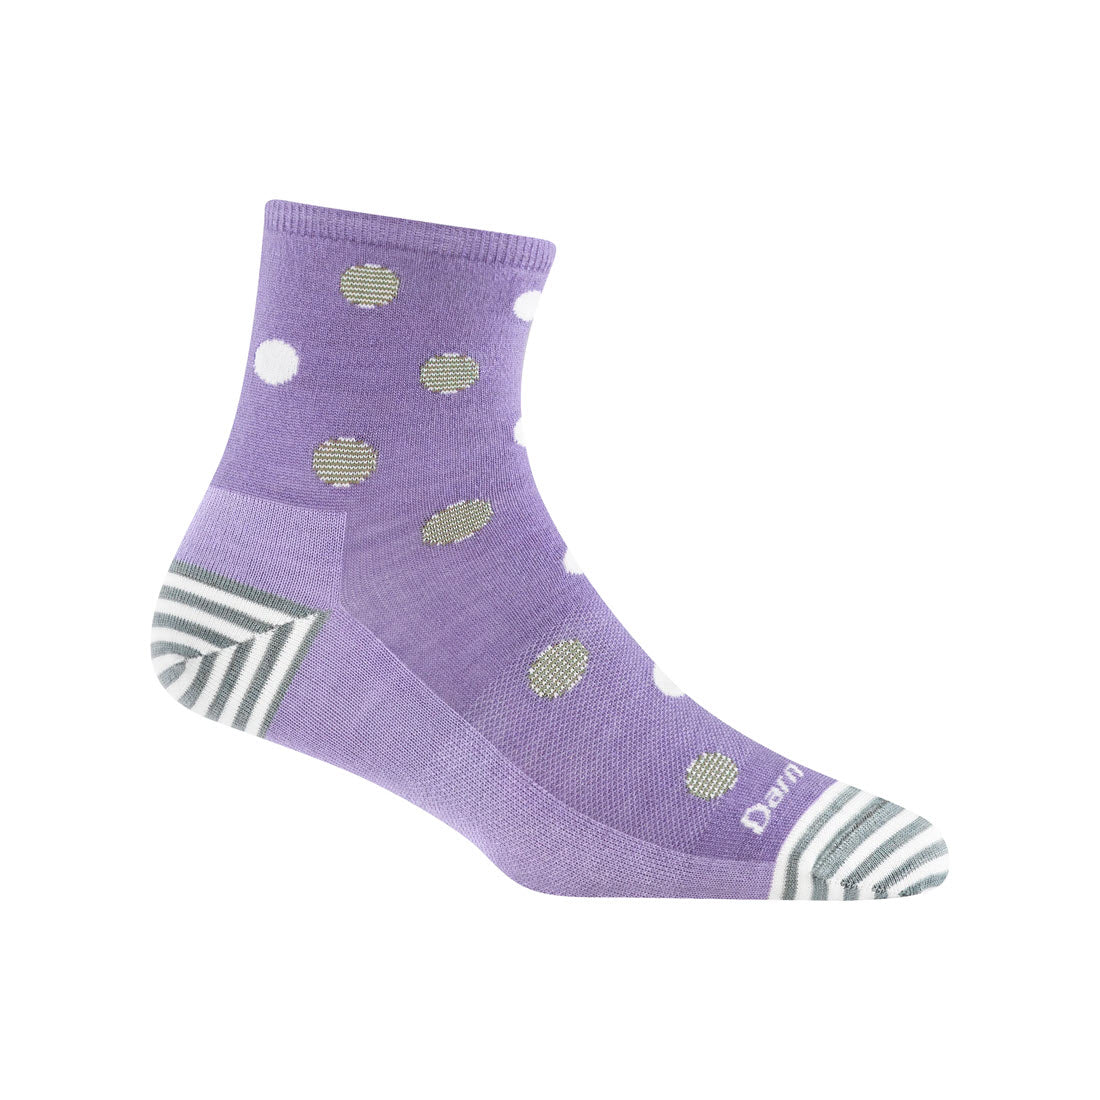 A single Darn Tough Dottie Shorty Socks Lavender - Womens ankle sock with white and green polka dots and a striped heel and toe design, displayed against a white background, offers long-lasting comfort.